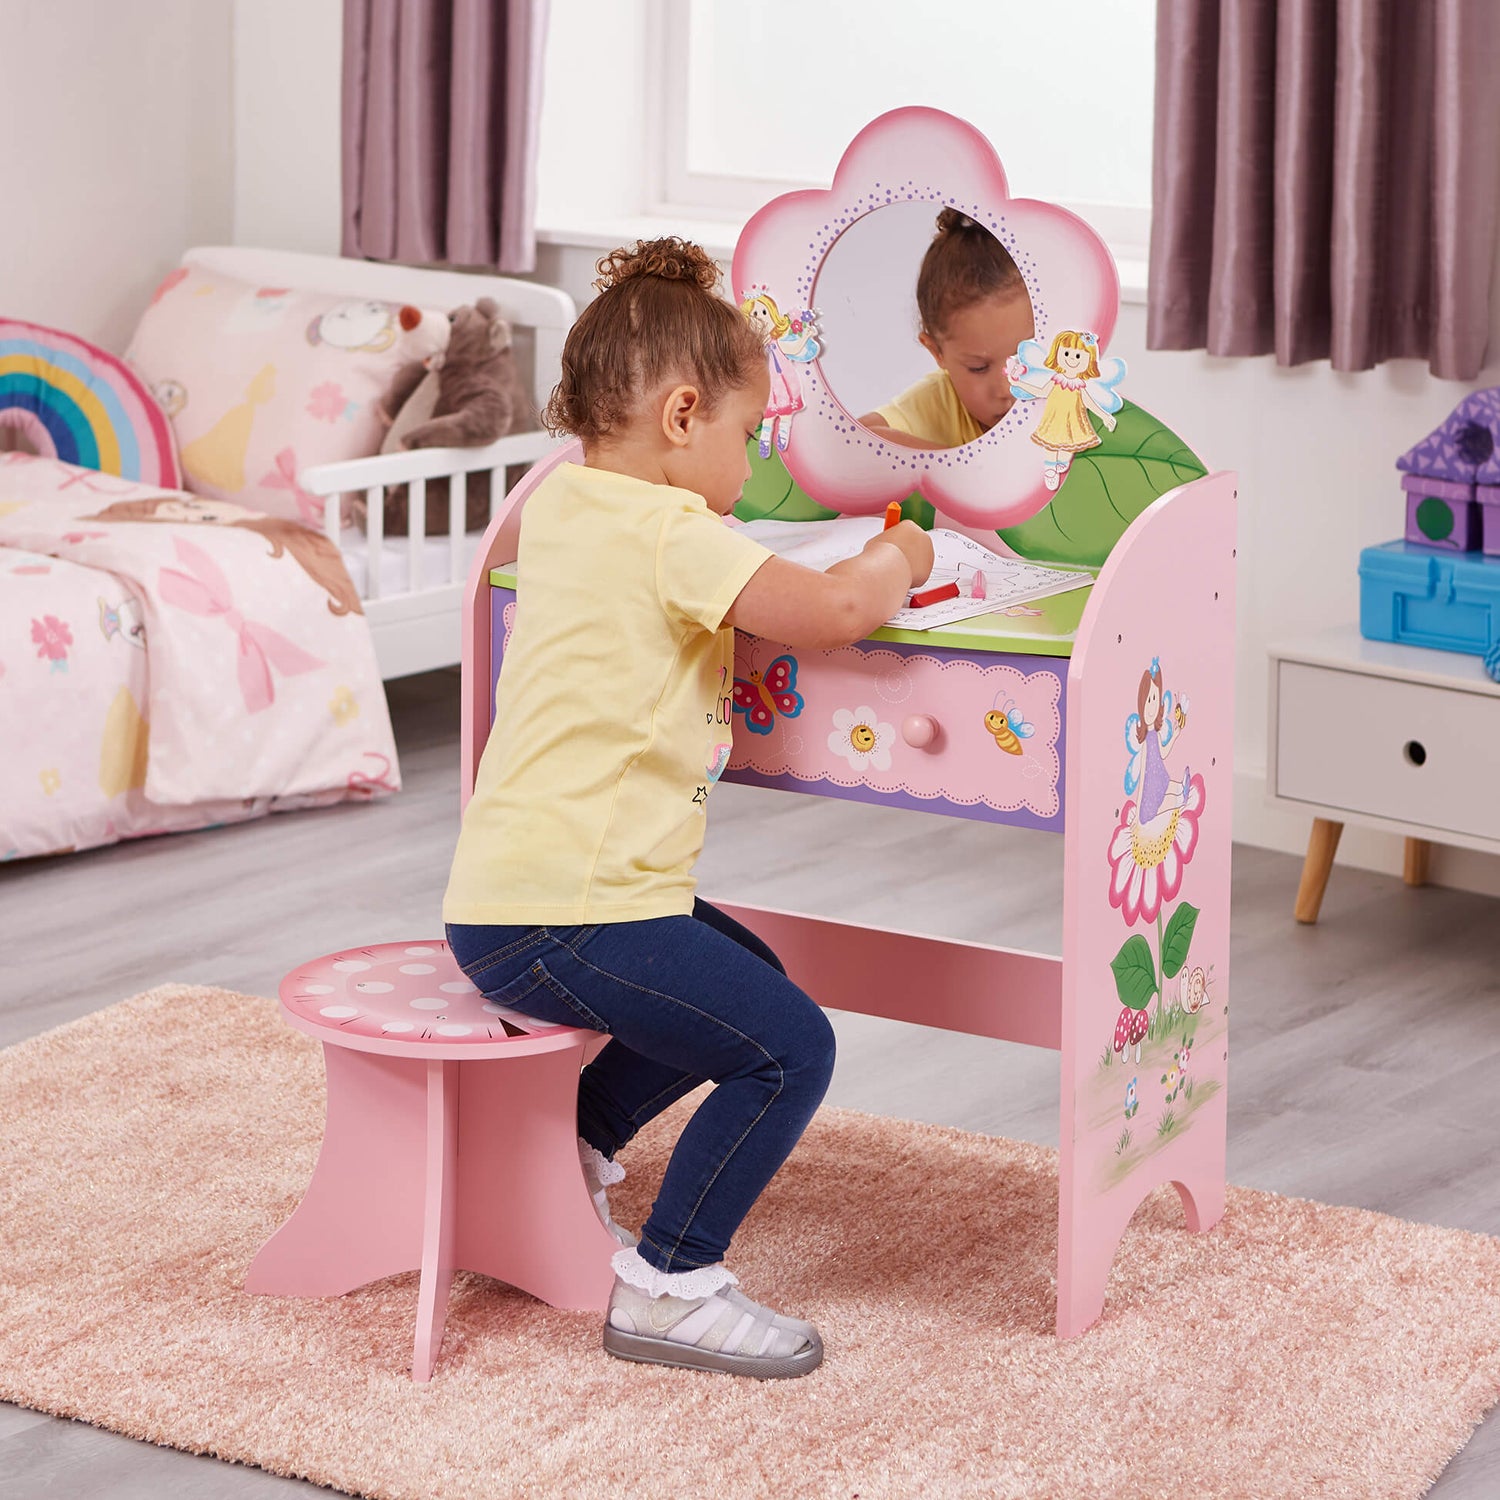 Third Eye Vanity Table & Chair Set for Girls,Make Up Dressing Table for  Girls-Pink - Vanity Table & Chair Set for Girls,Make Up Dressing Table for  Girls-Pink . shop for Third Eye